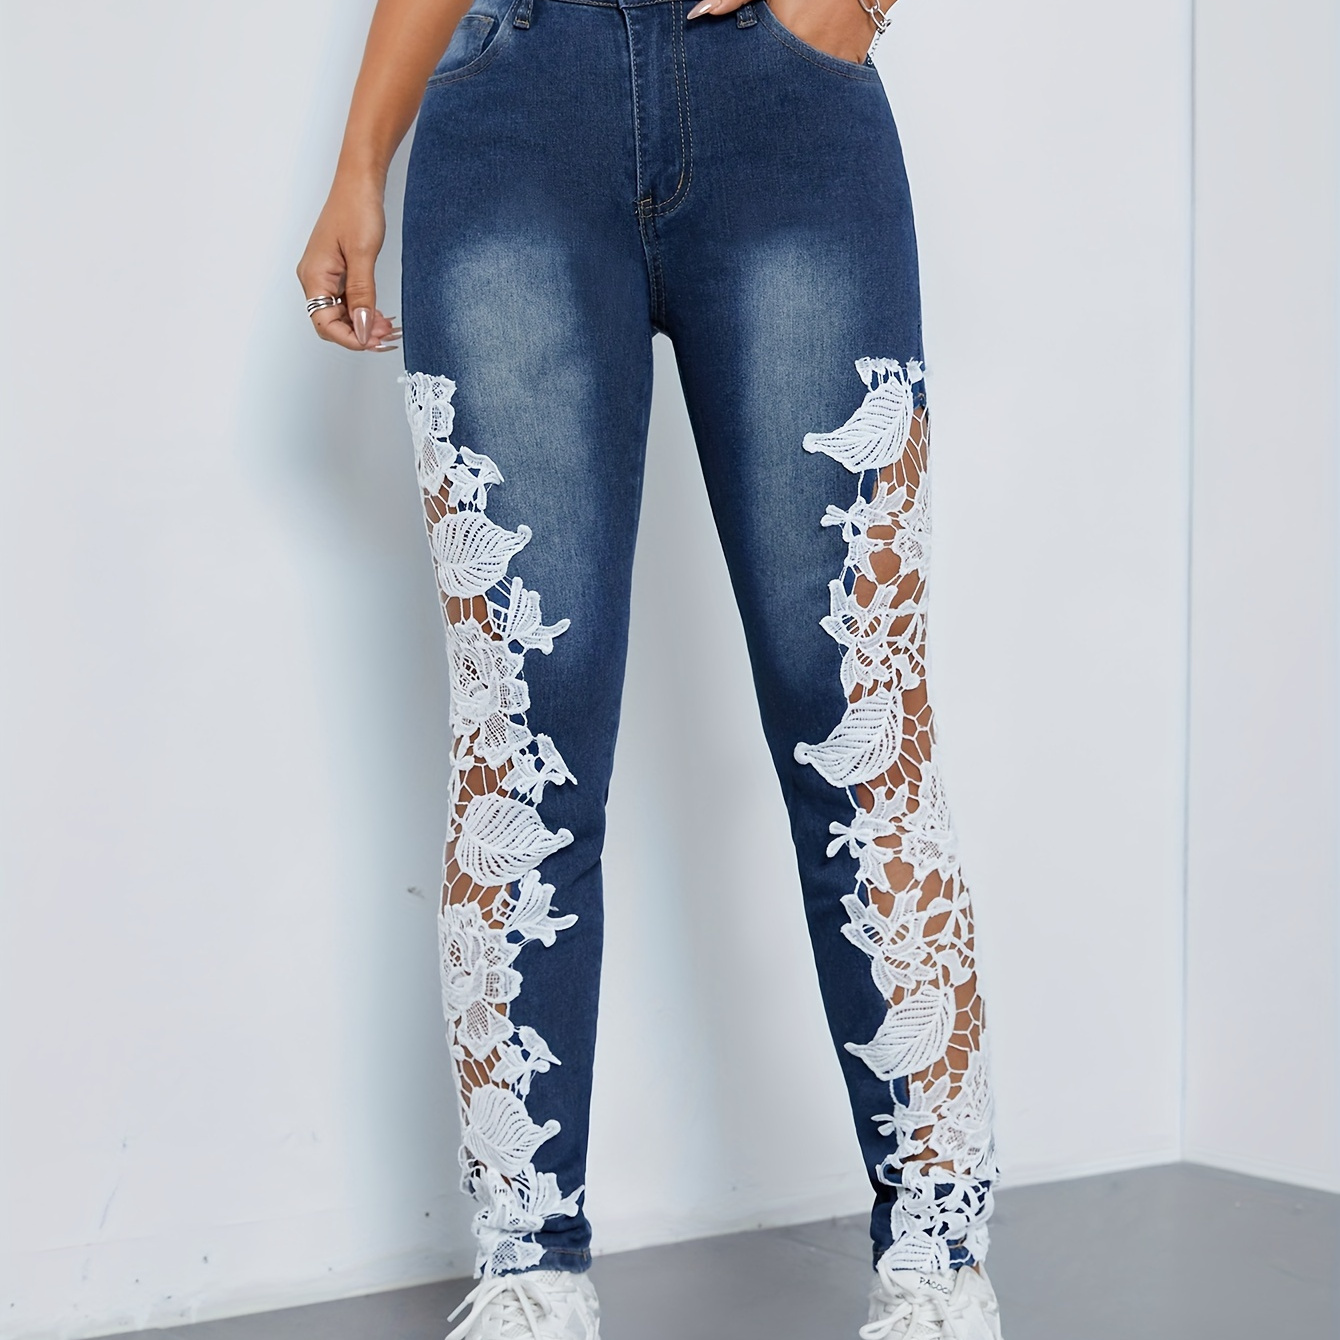 

Women's Sexy Lace Patchwork Hollow-out Denim Jeans, Street Style Floral Skinny Pants, Chic Jeans With Lace Details